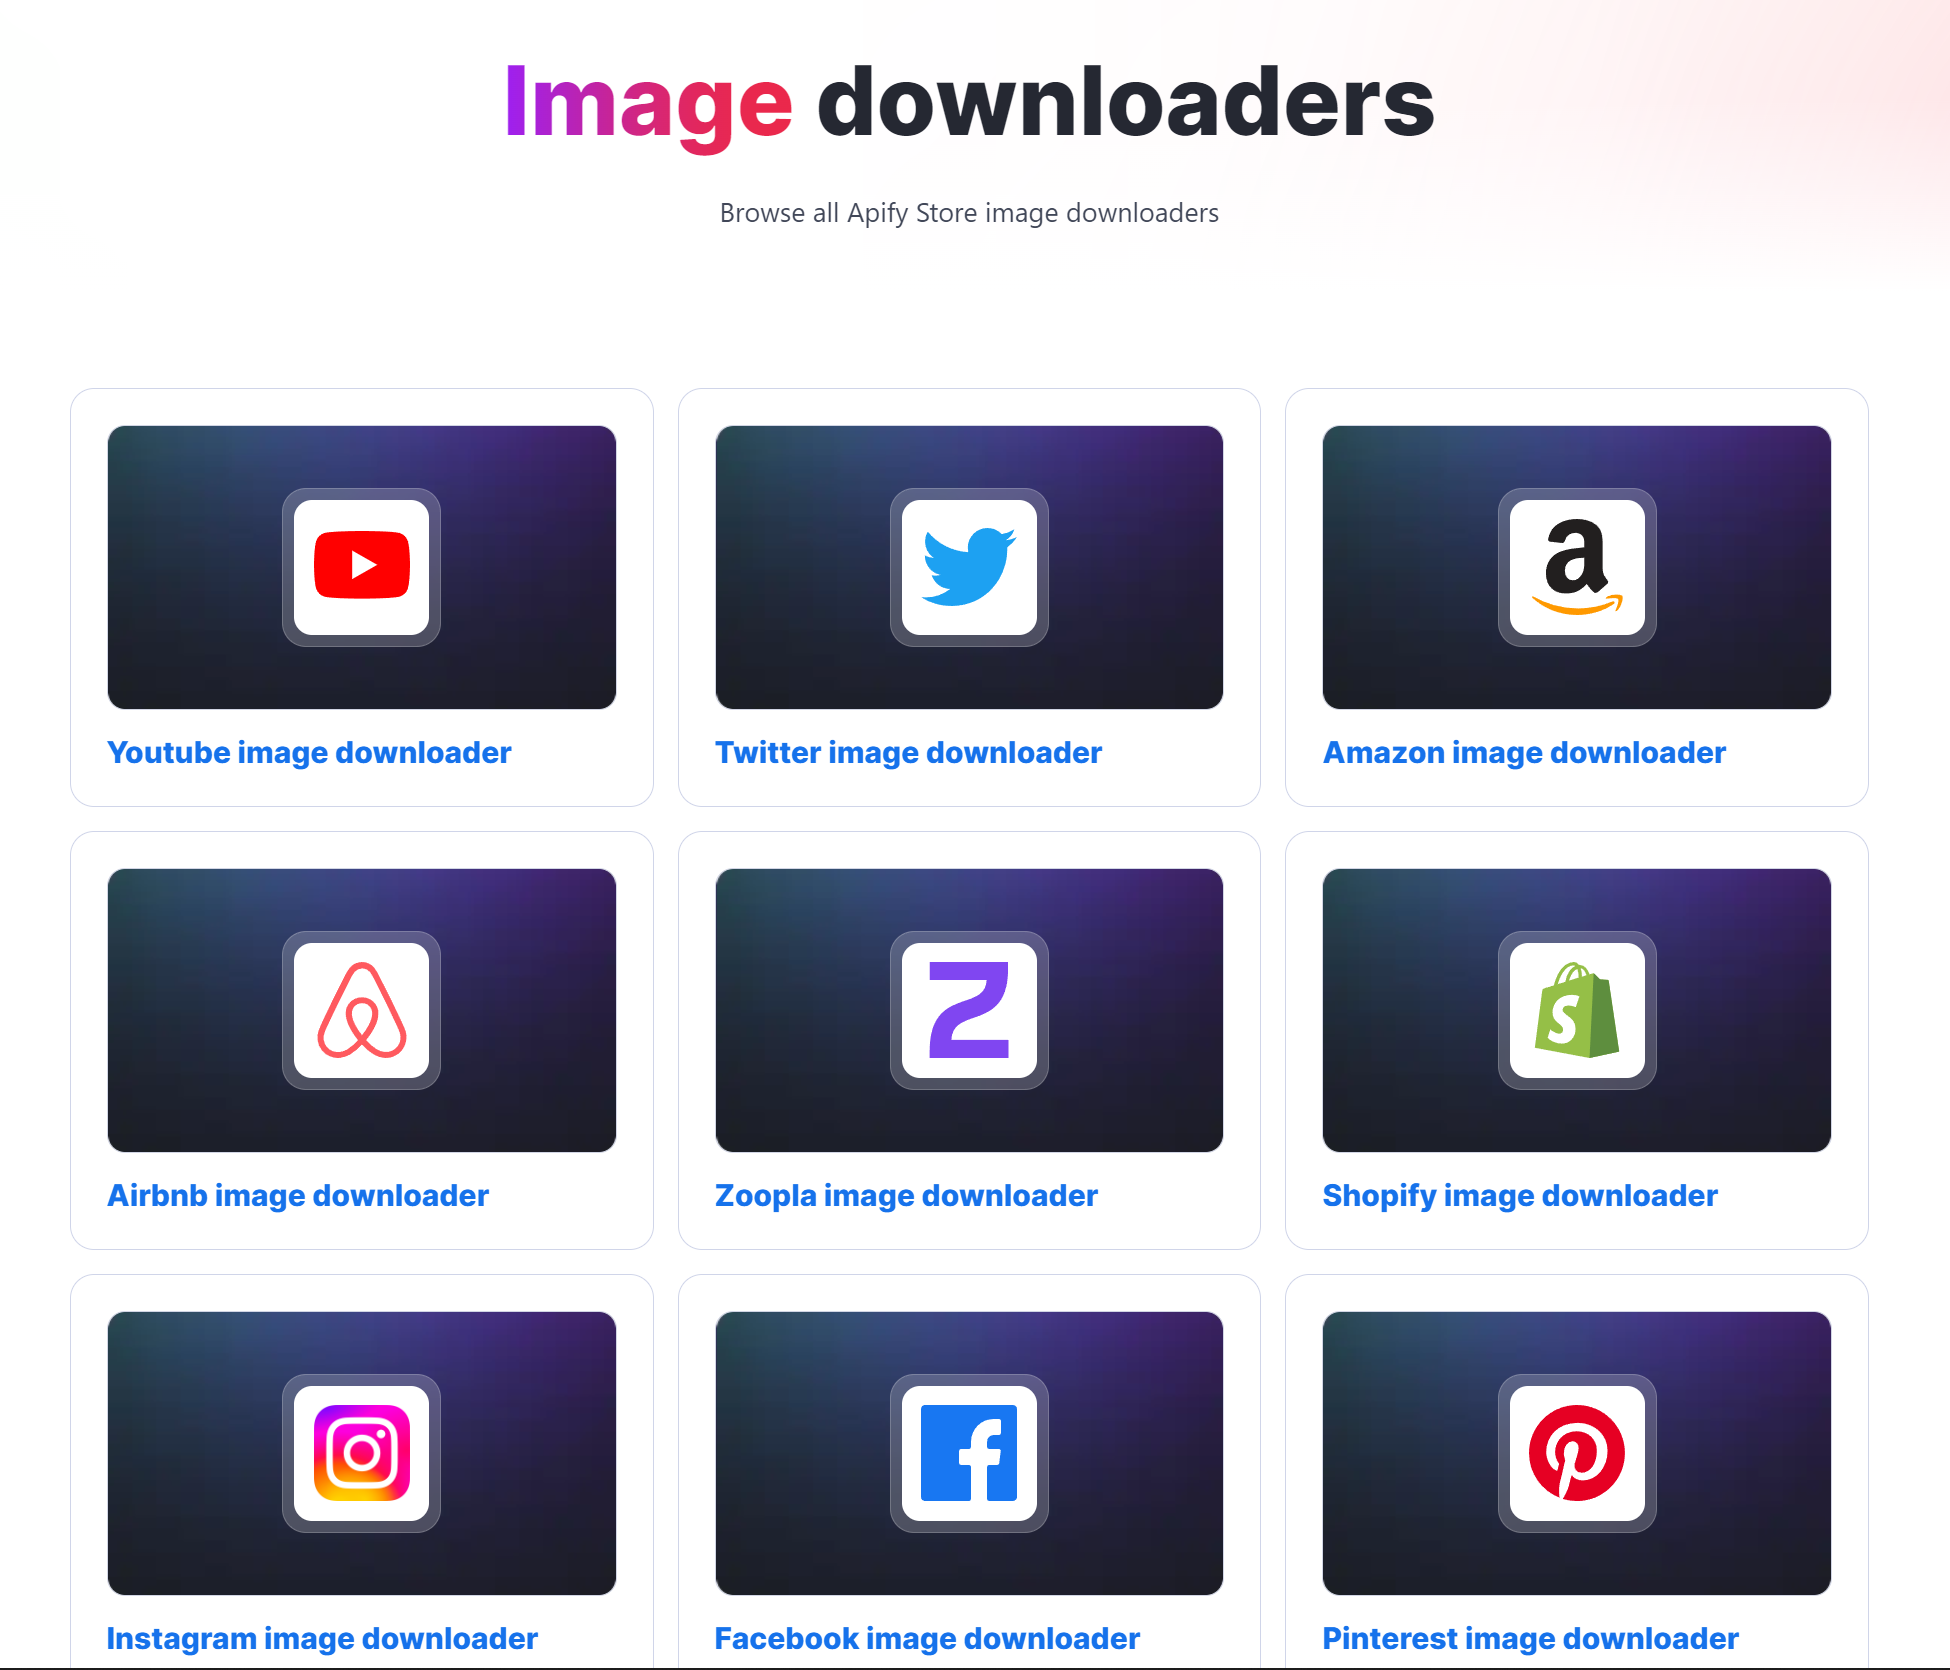 Apify Store has image downloaders for many popular websites